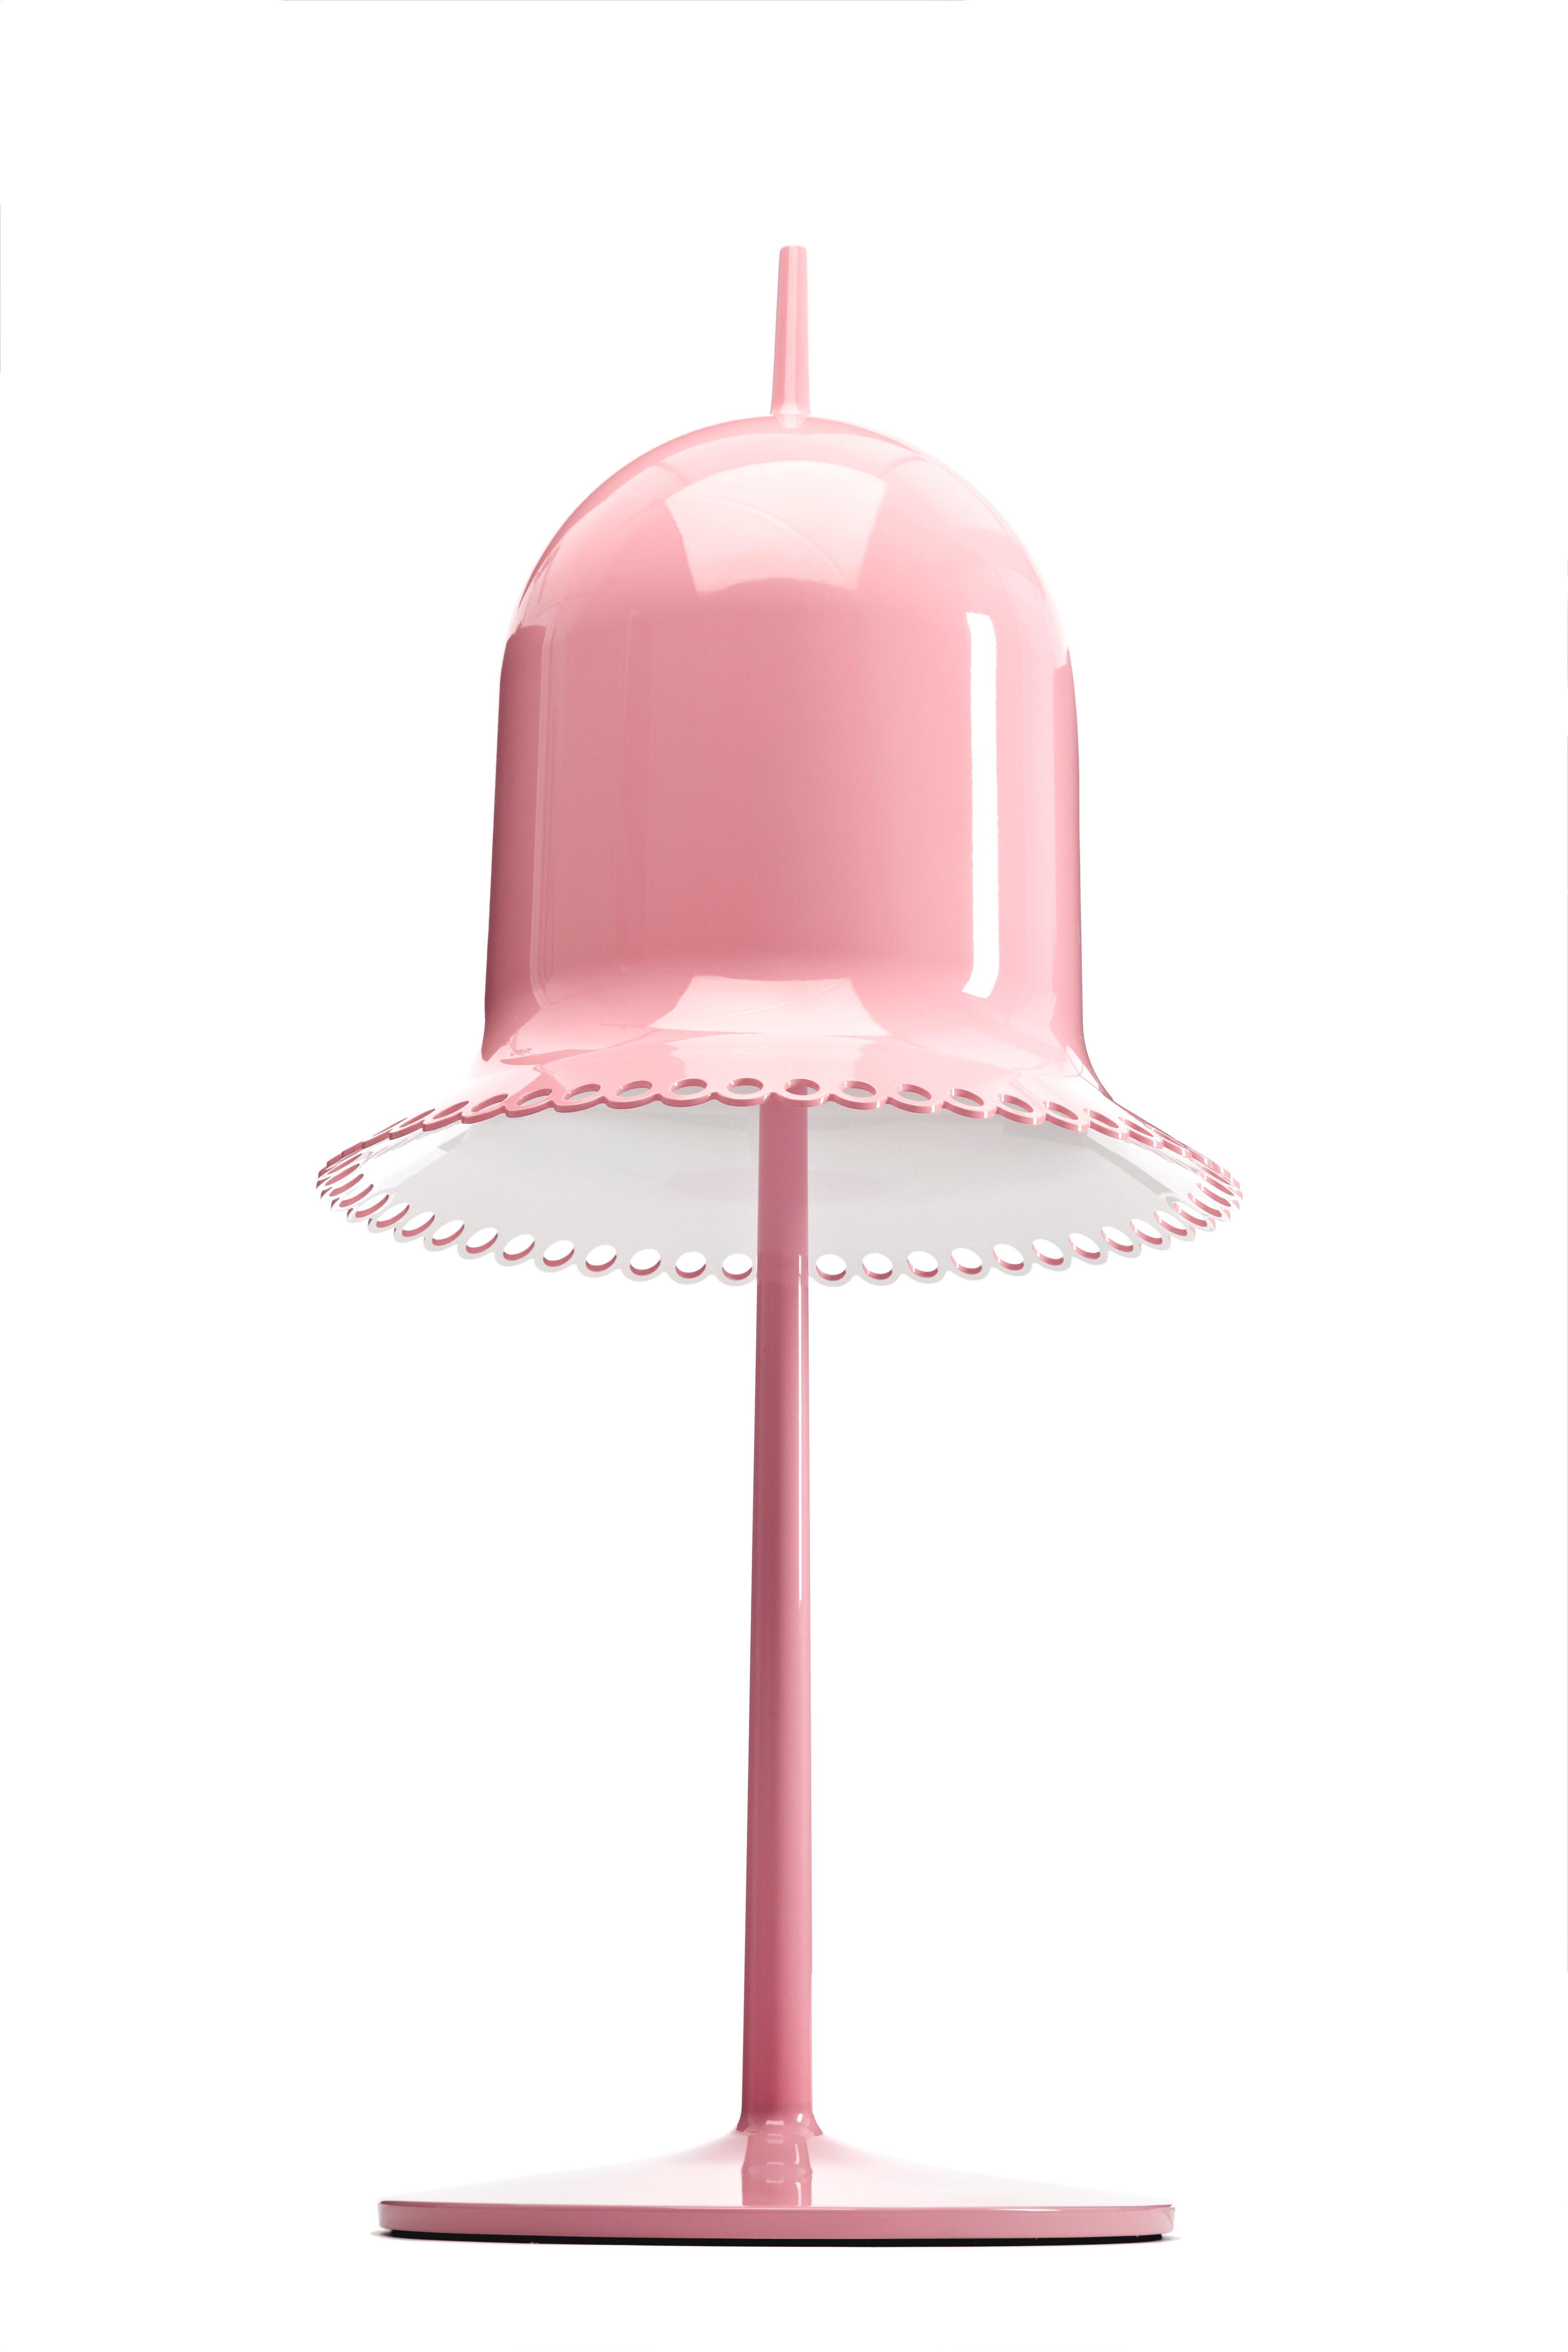 Moooi Lolita Table Lamp in Pink Lacquered Plastic by Nika Zupanc For Sale 1